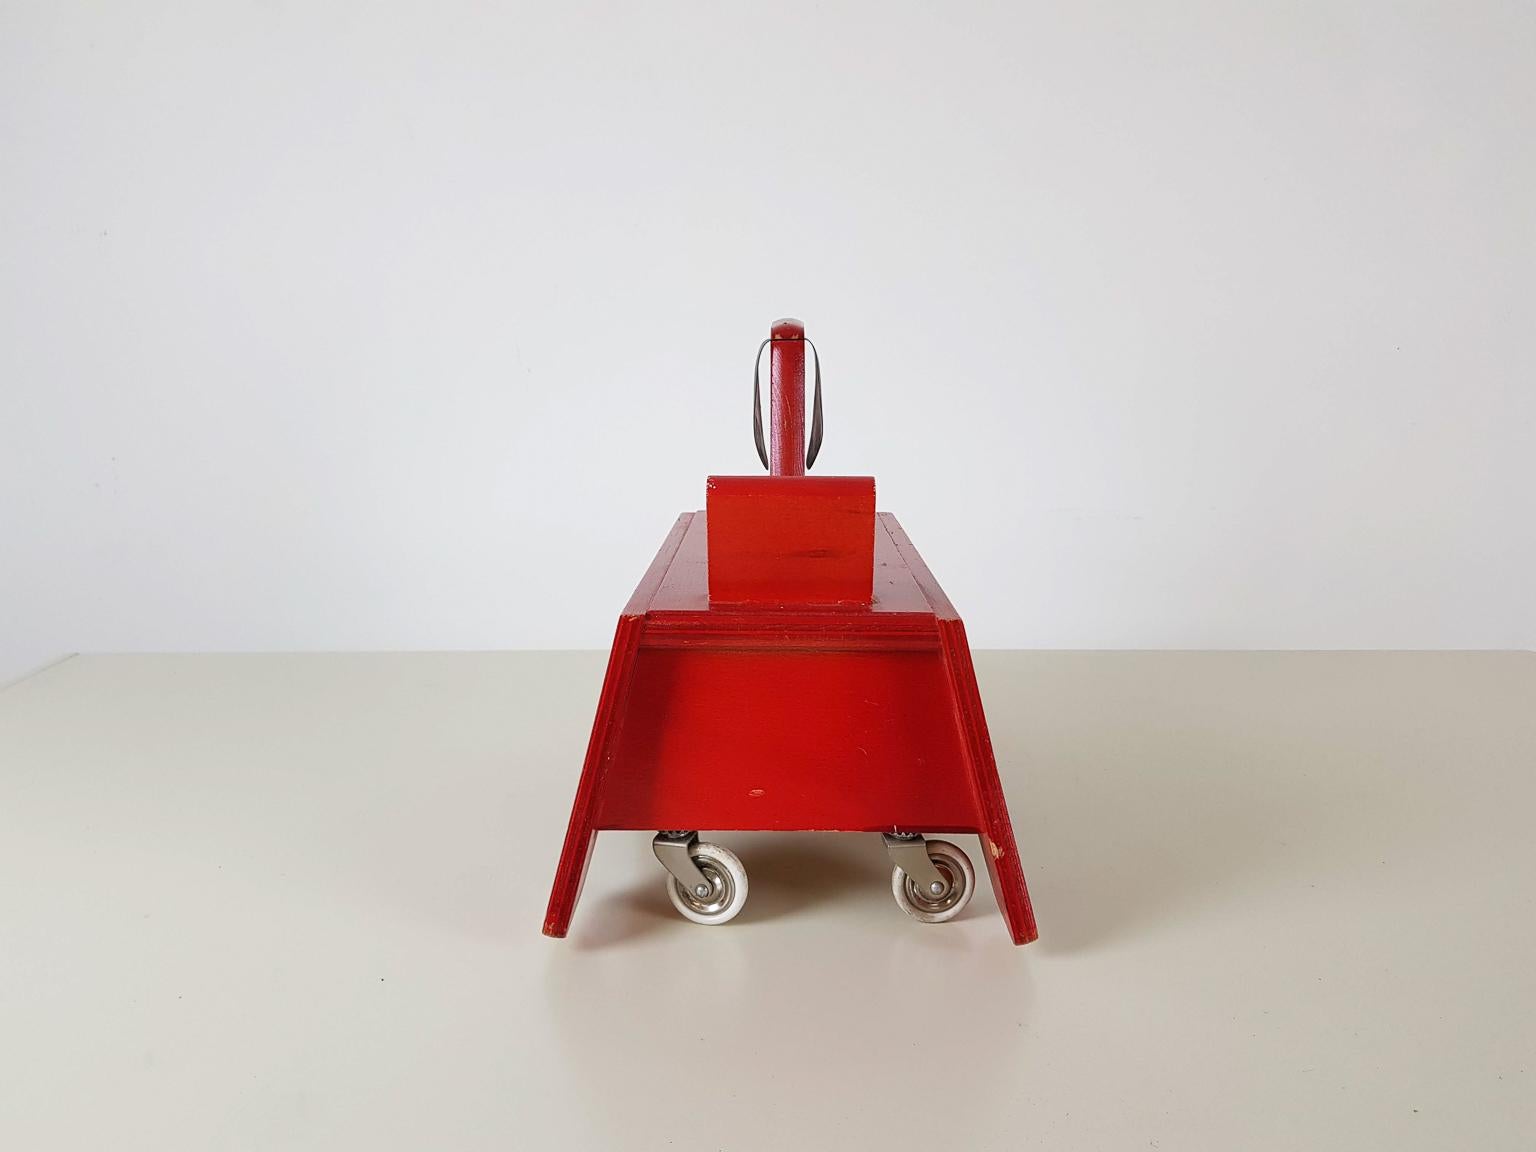 Just look at this happy vintage dog from the 1950s! This post-war wooden dog on wheels was made and designed by German toy manufacturer Konrad Keller Holzspielwaren. The red dog has seating place for a kid and can be used as a toy car.

A